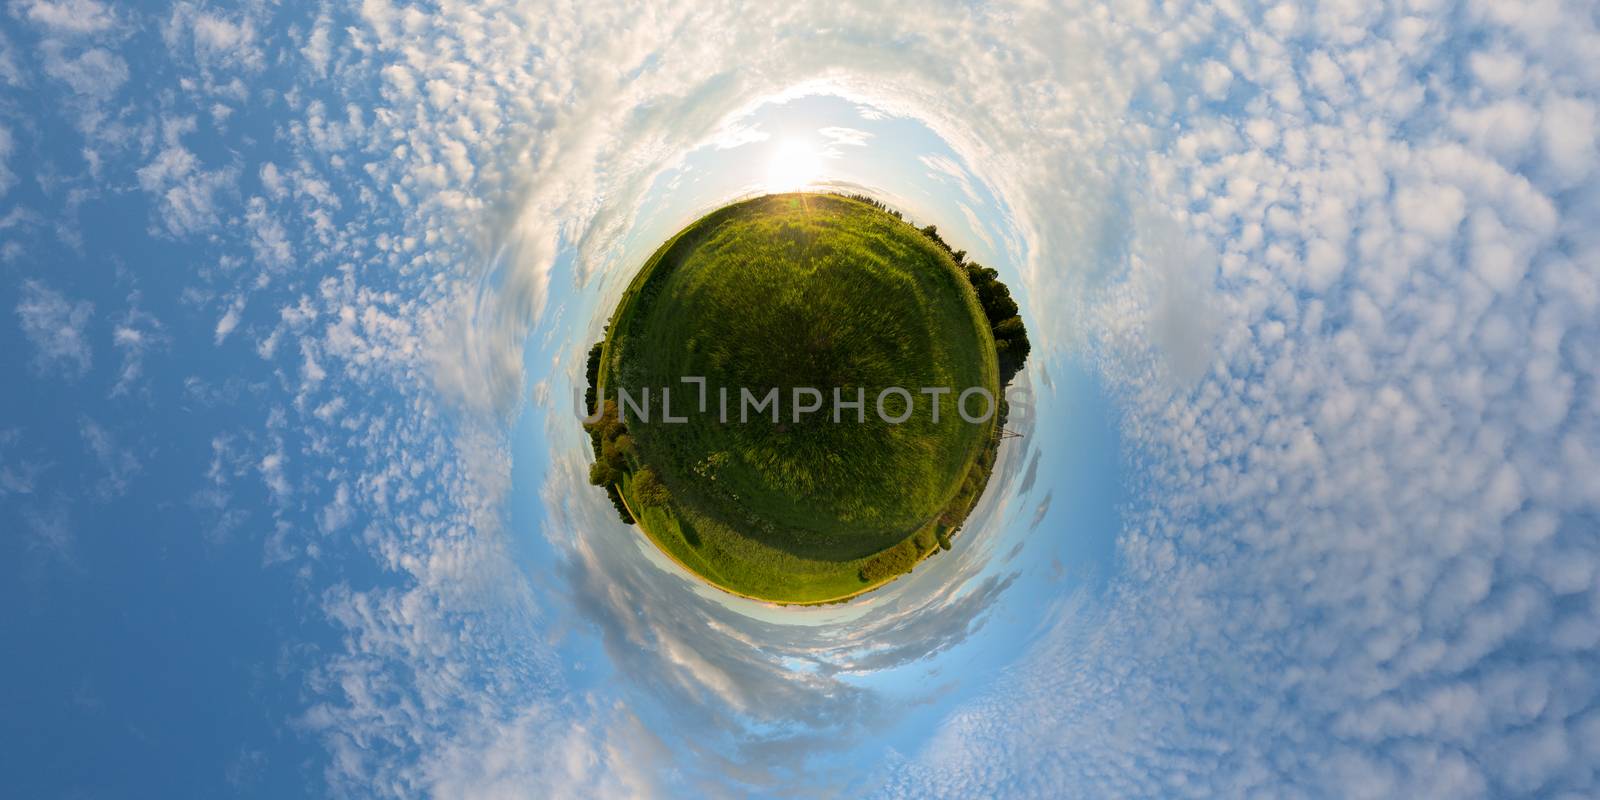 Sunset on meadow little planet panorama with 2 by 1 aspect ratio.